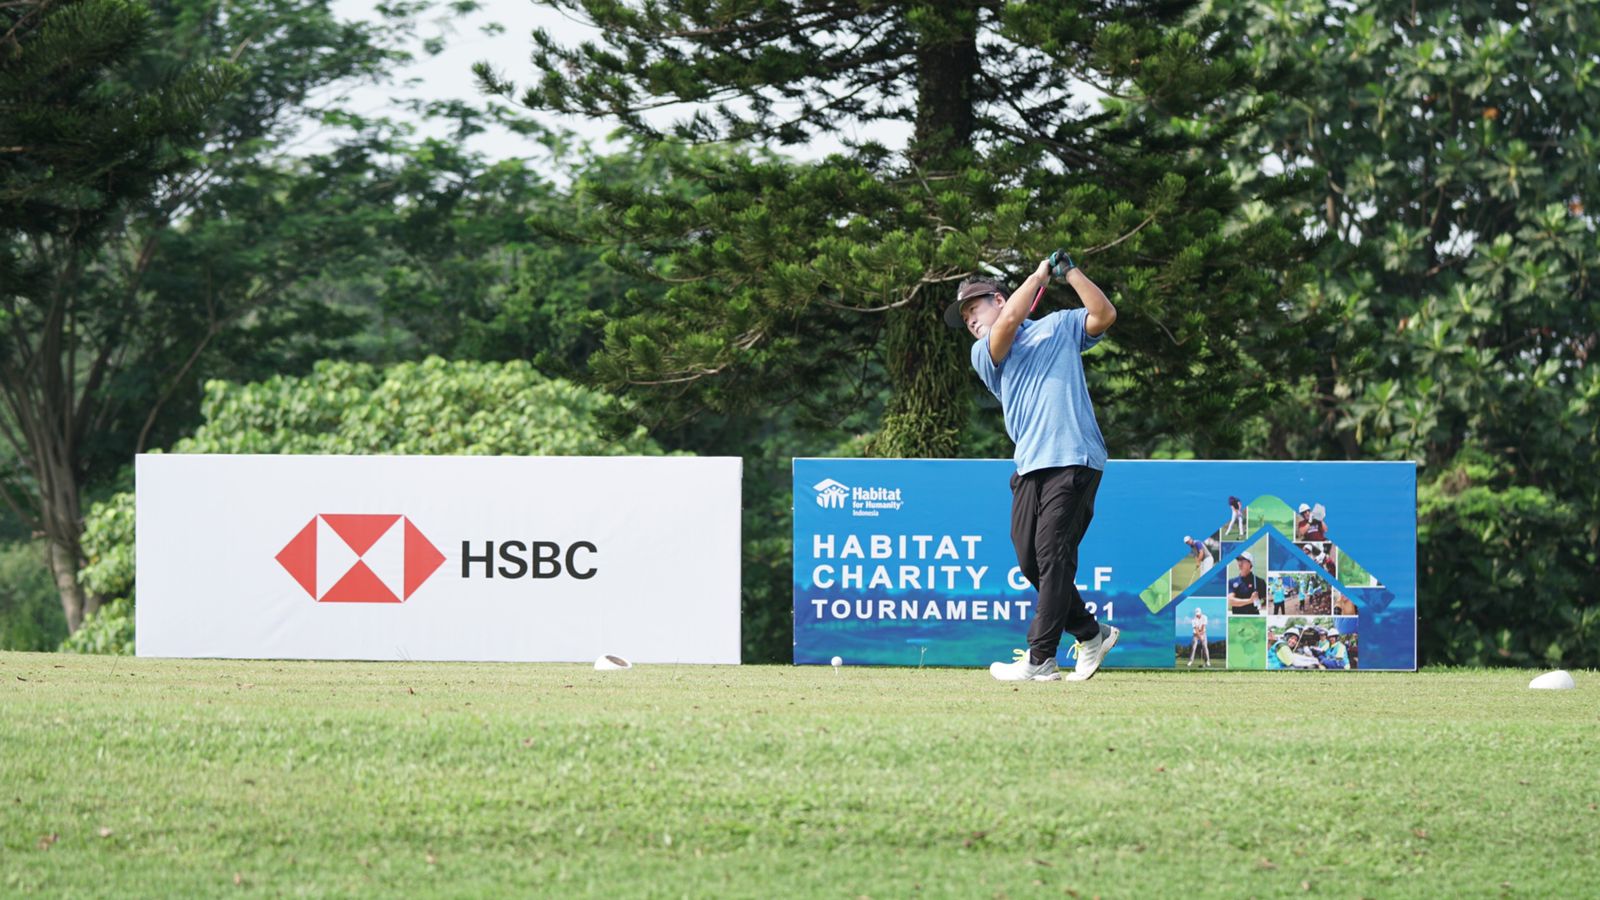 Habitat Charity Golf Tournament 2021 is Back to Build Decent Housing for Underserved Communities